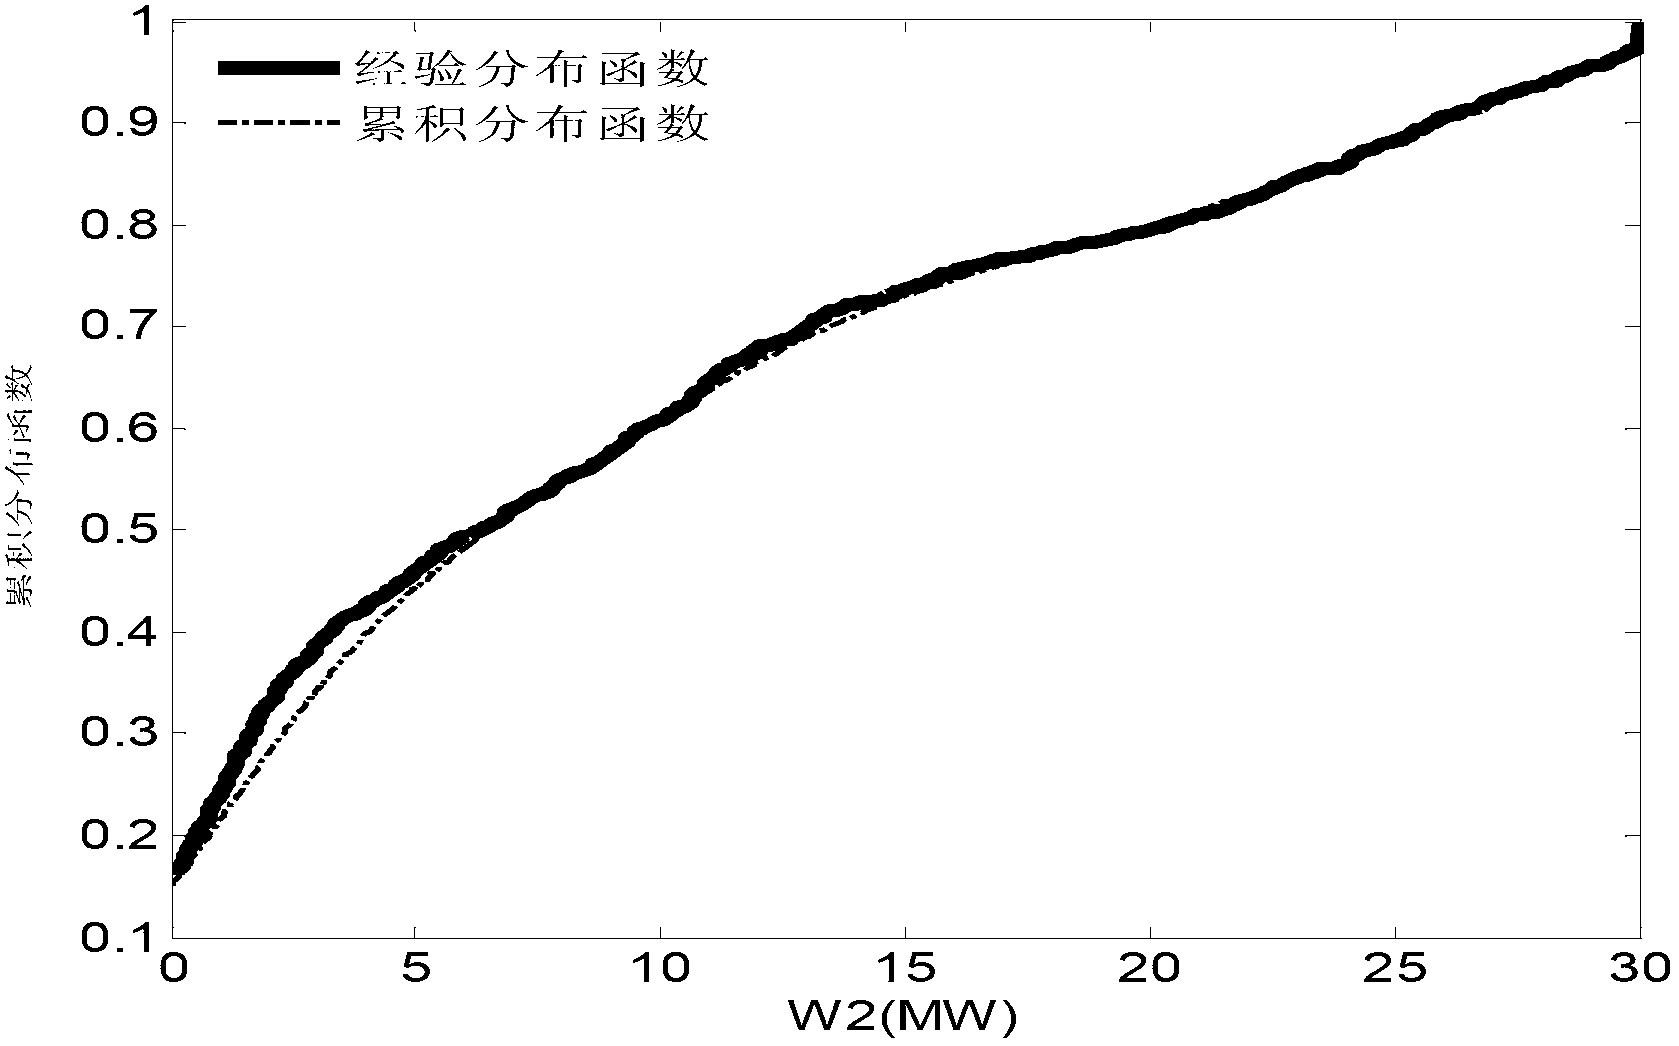 Copula-function-based method for acquiring relevant characteristic of wind power plant capacity